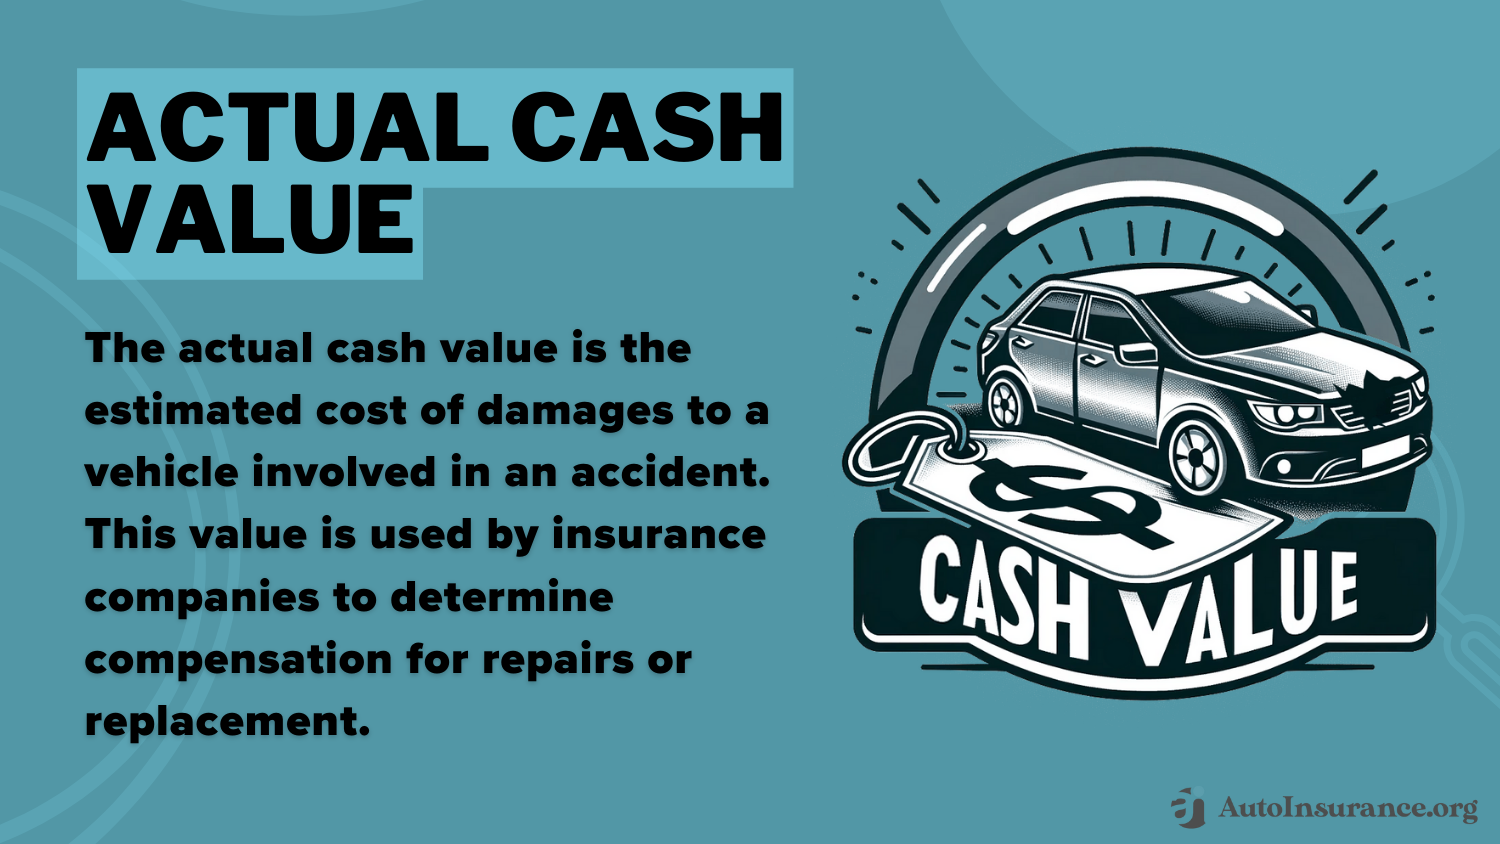 Best Ford Mustang SVT Cobra Auto Insurance: Actual Cash Value Definition Card